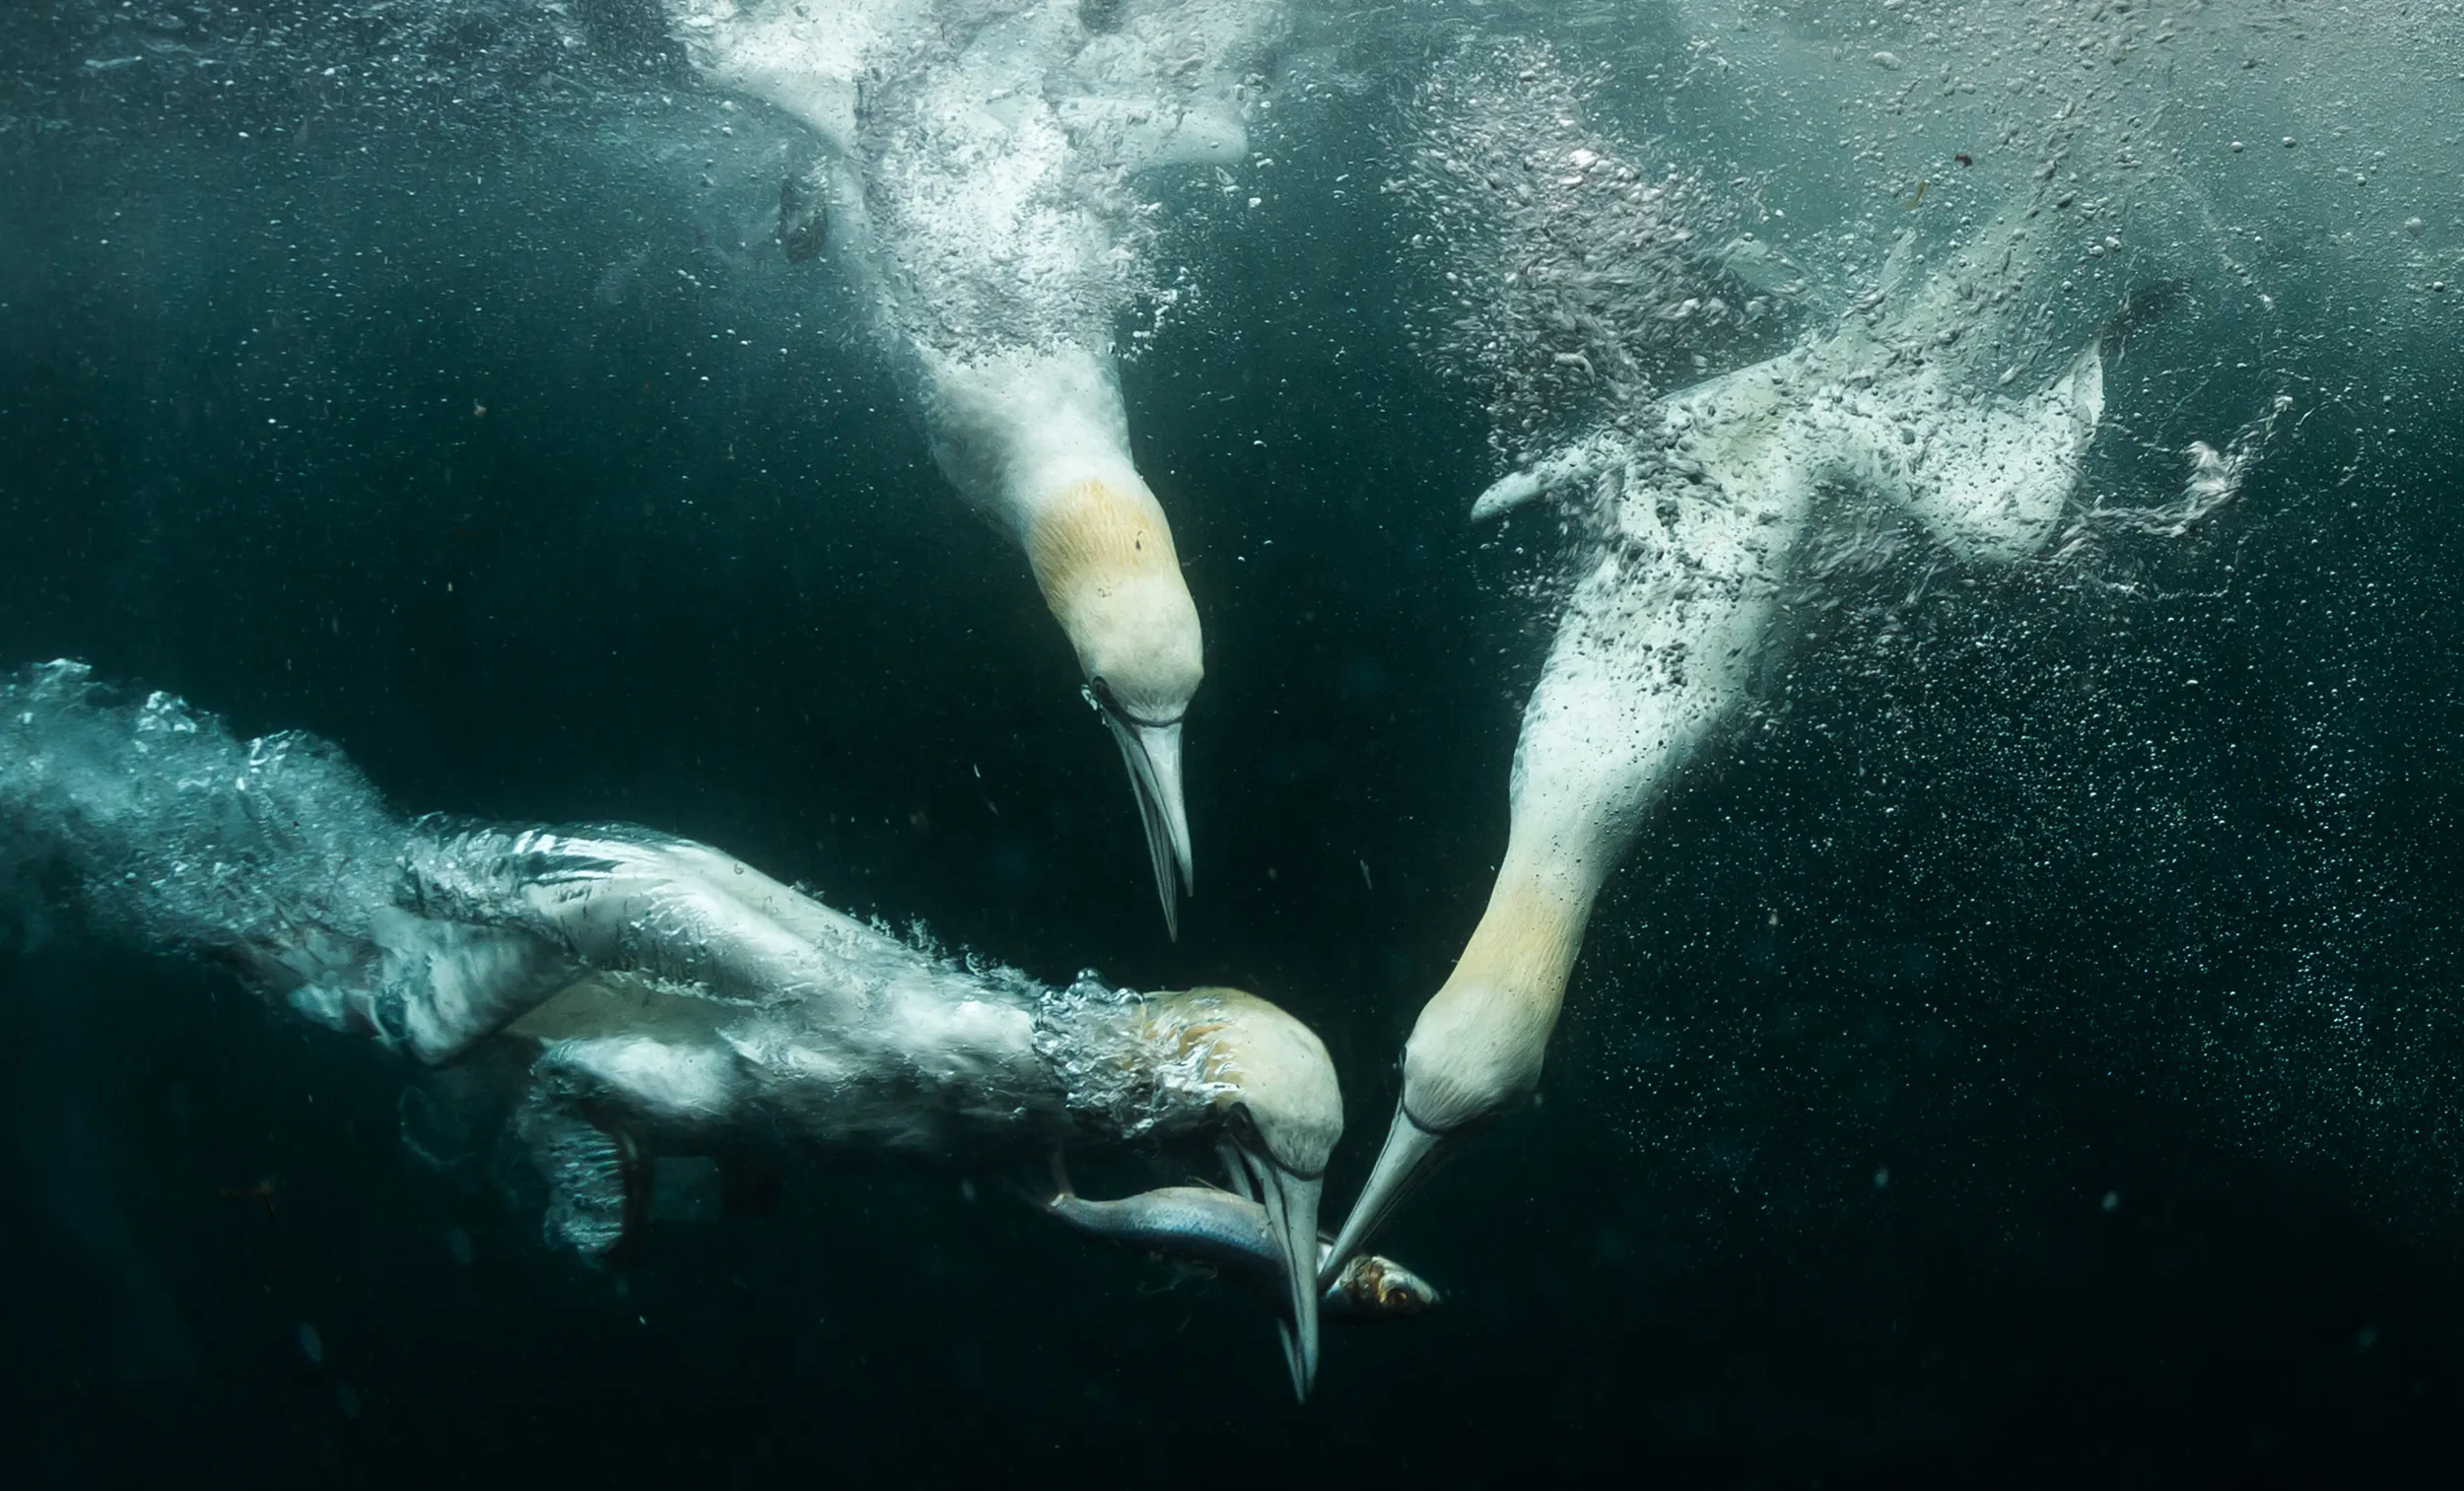 A group of Gannets driving underwater catching fish.